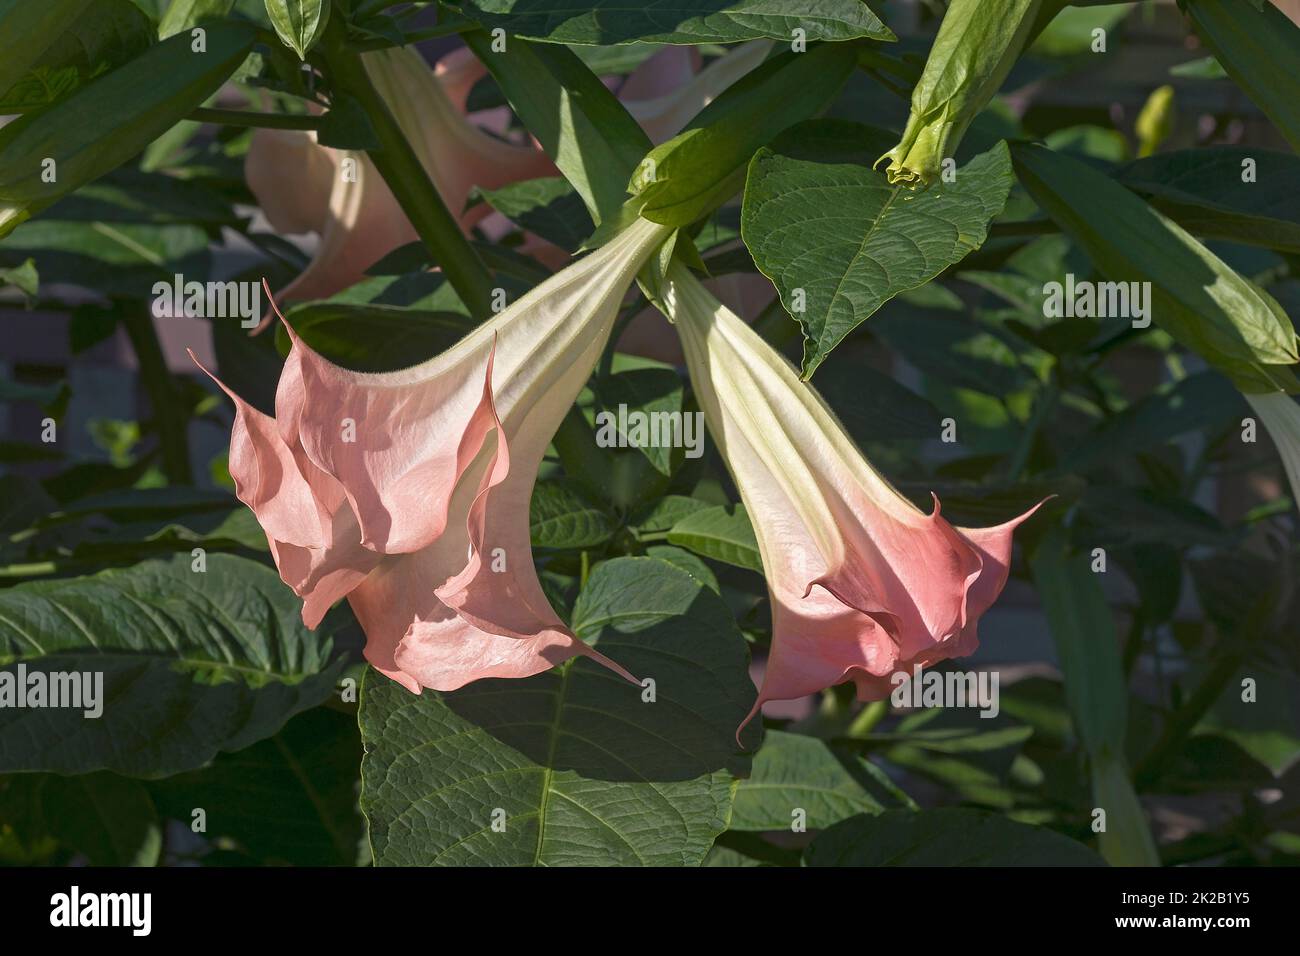 Close-up image of Angels trumpet flowers. Stock Photo